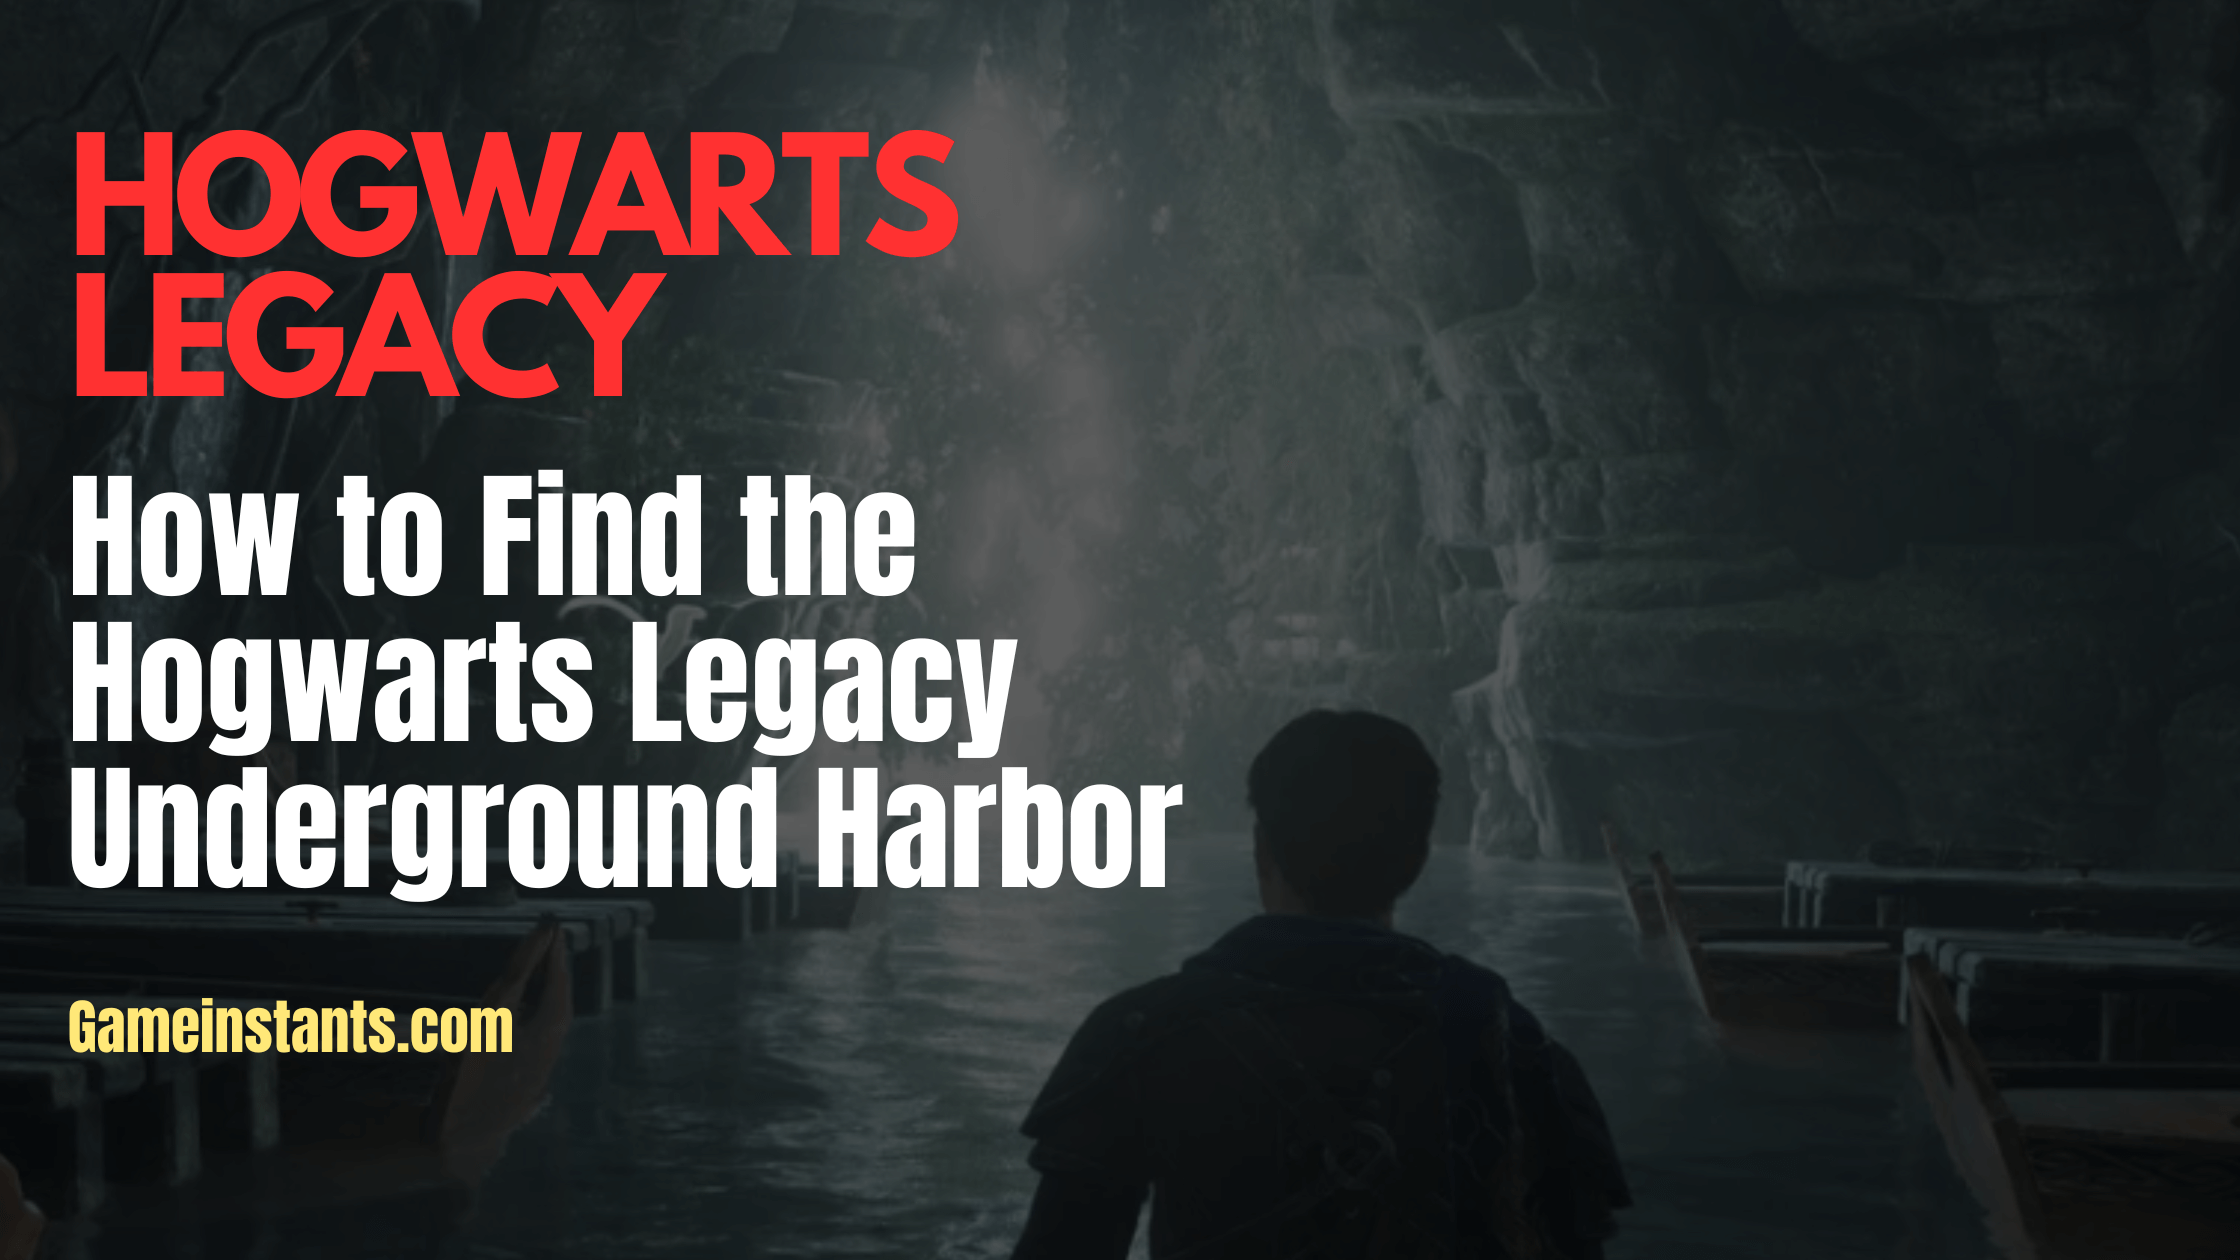 How to Find the Hogwarts Legacy Underground Harbor